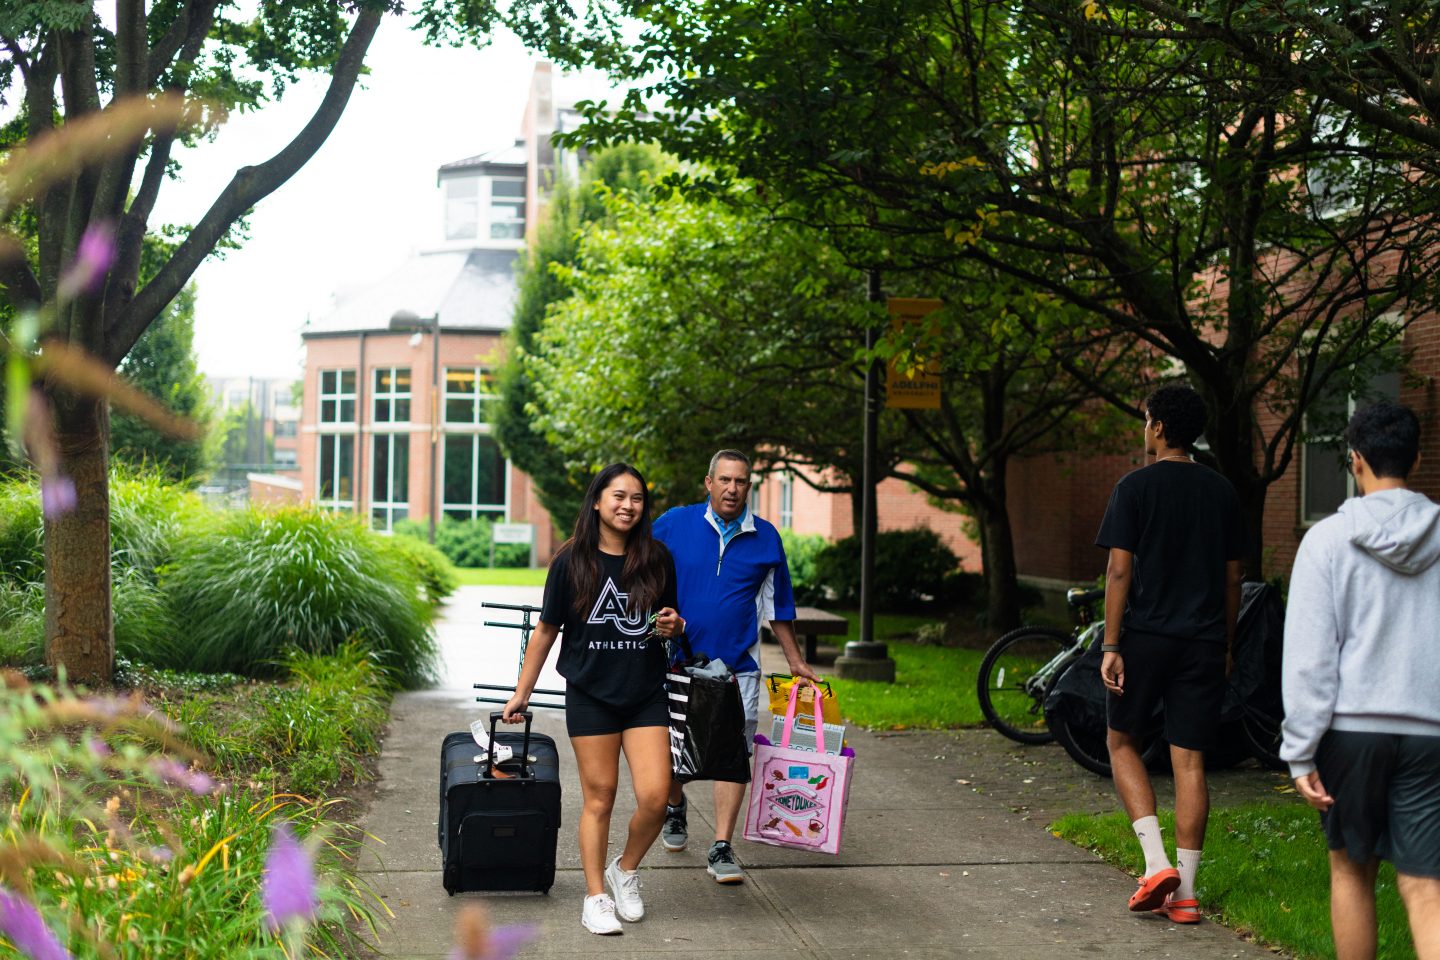 A young woman in an "AU Athletics" T-shirt smiles as she pulls a suitcase on a tree-lined campus walkway, followed by a man carrying bags, with other students walking nearby on a bright day.